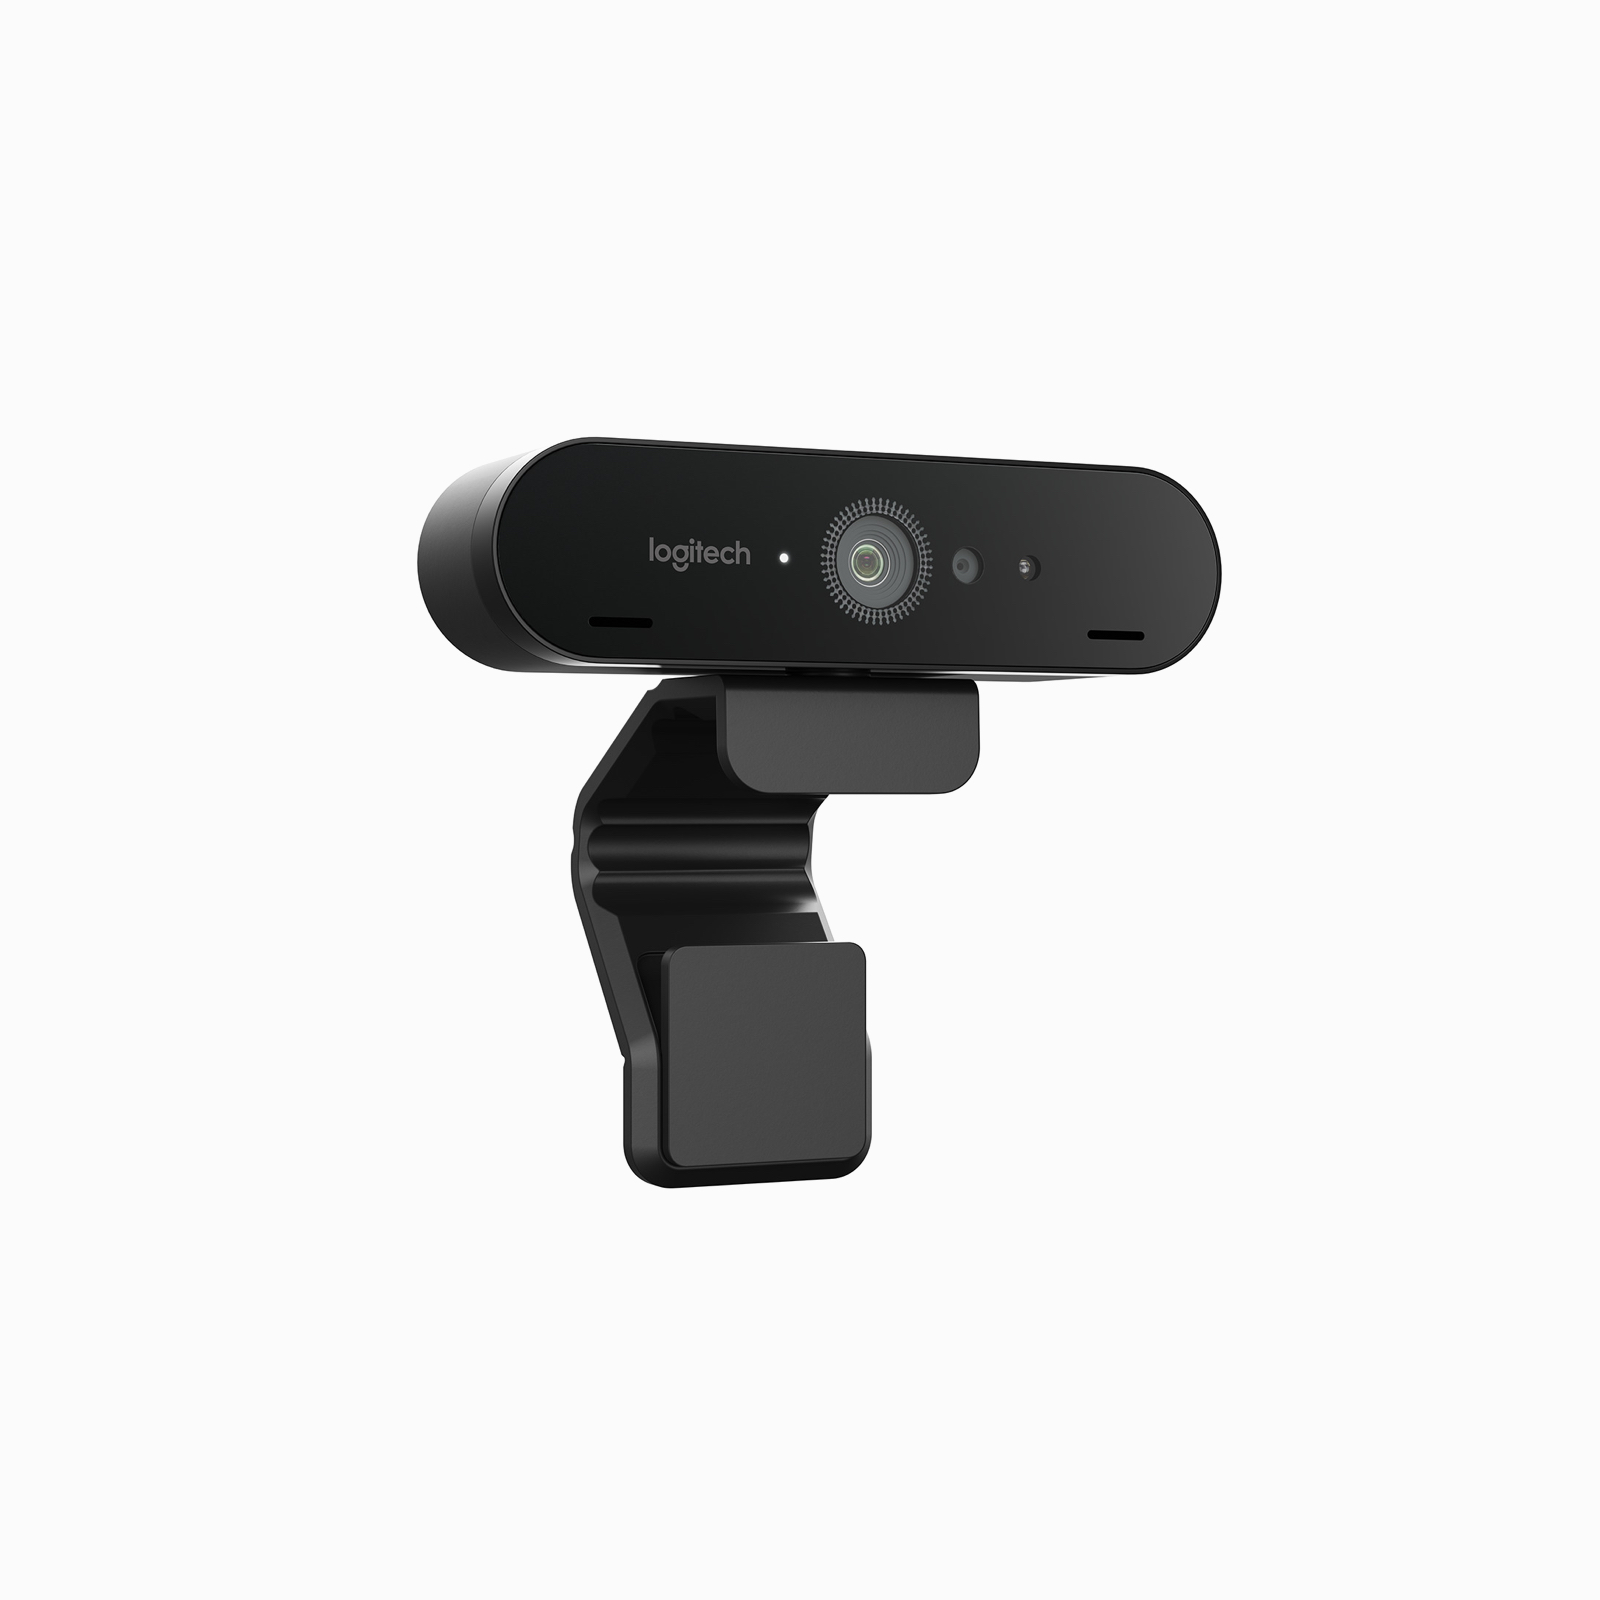 A Logitech Brio Webcam in black, viewed at an angle.